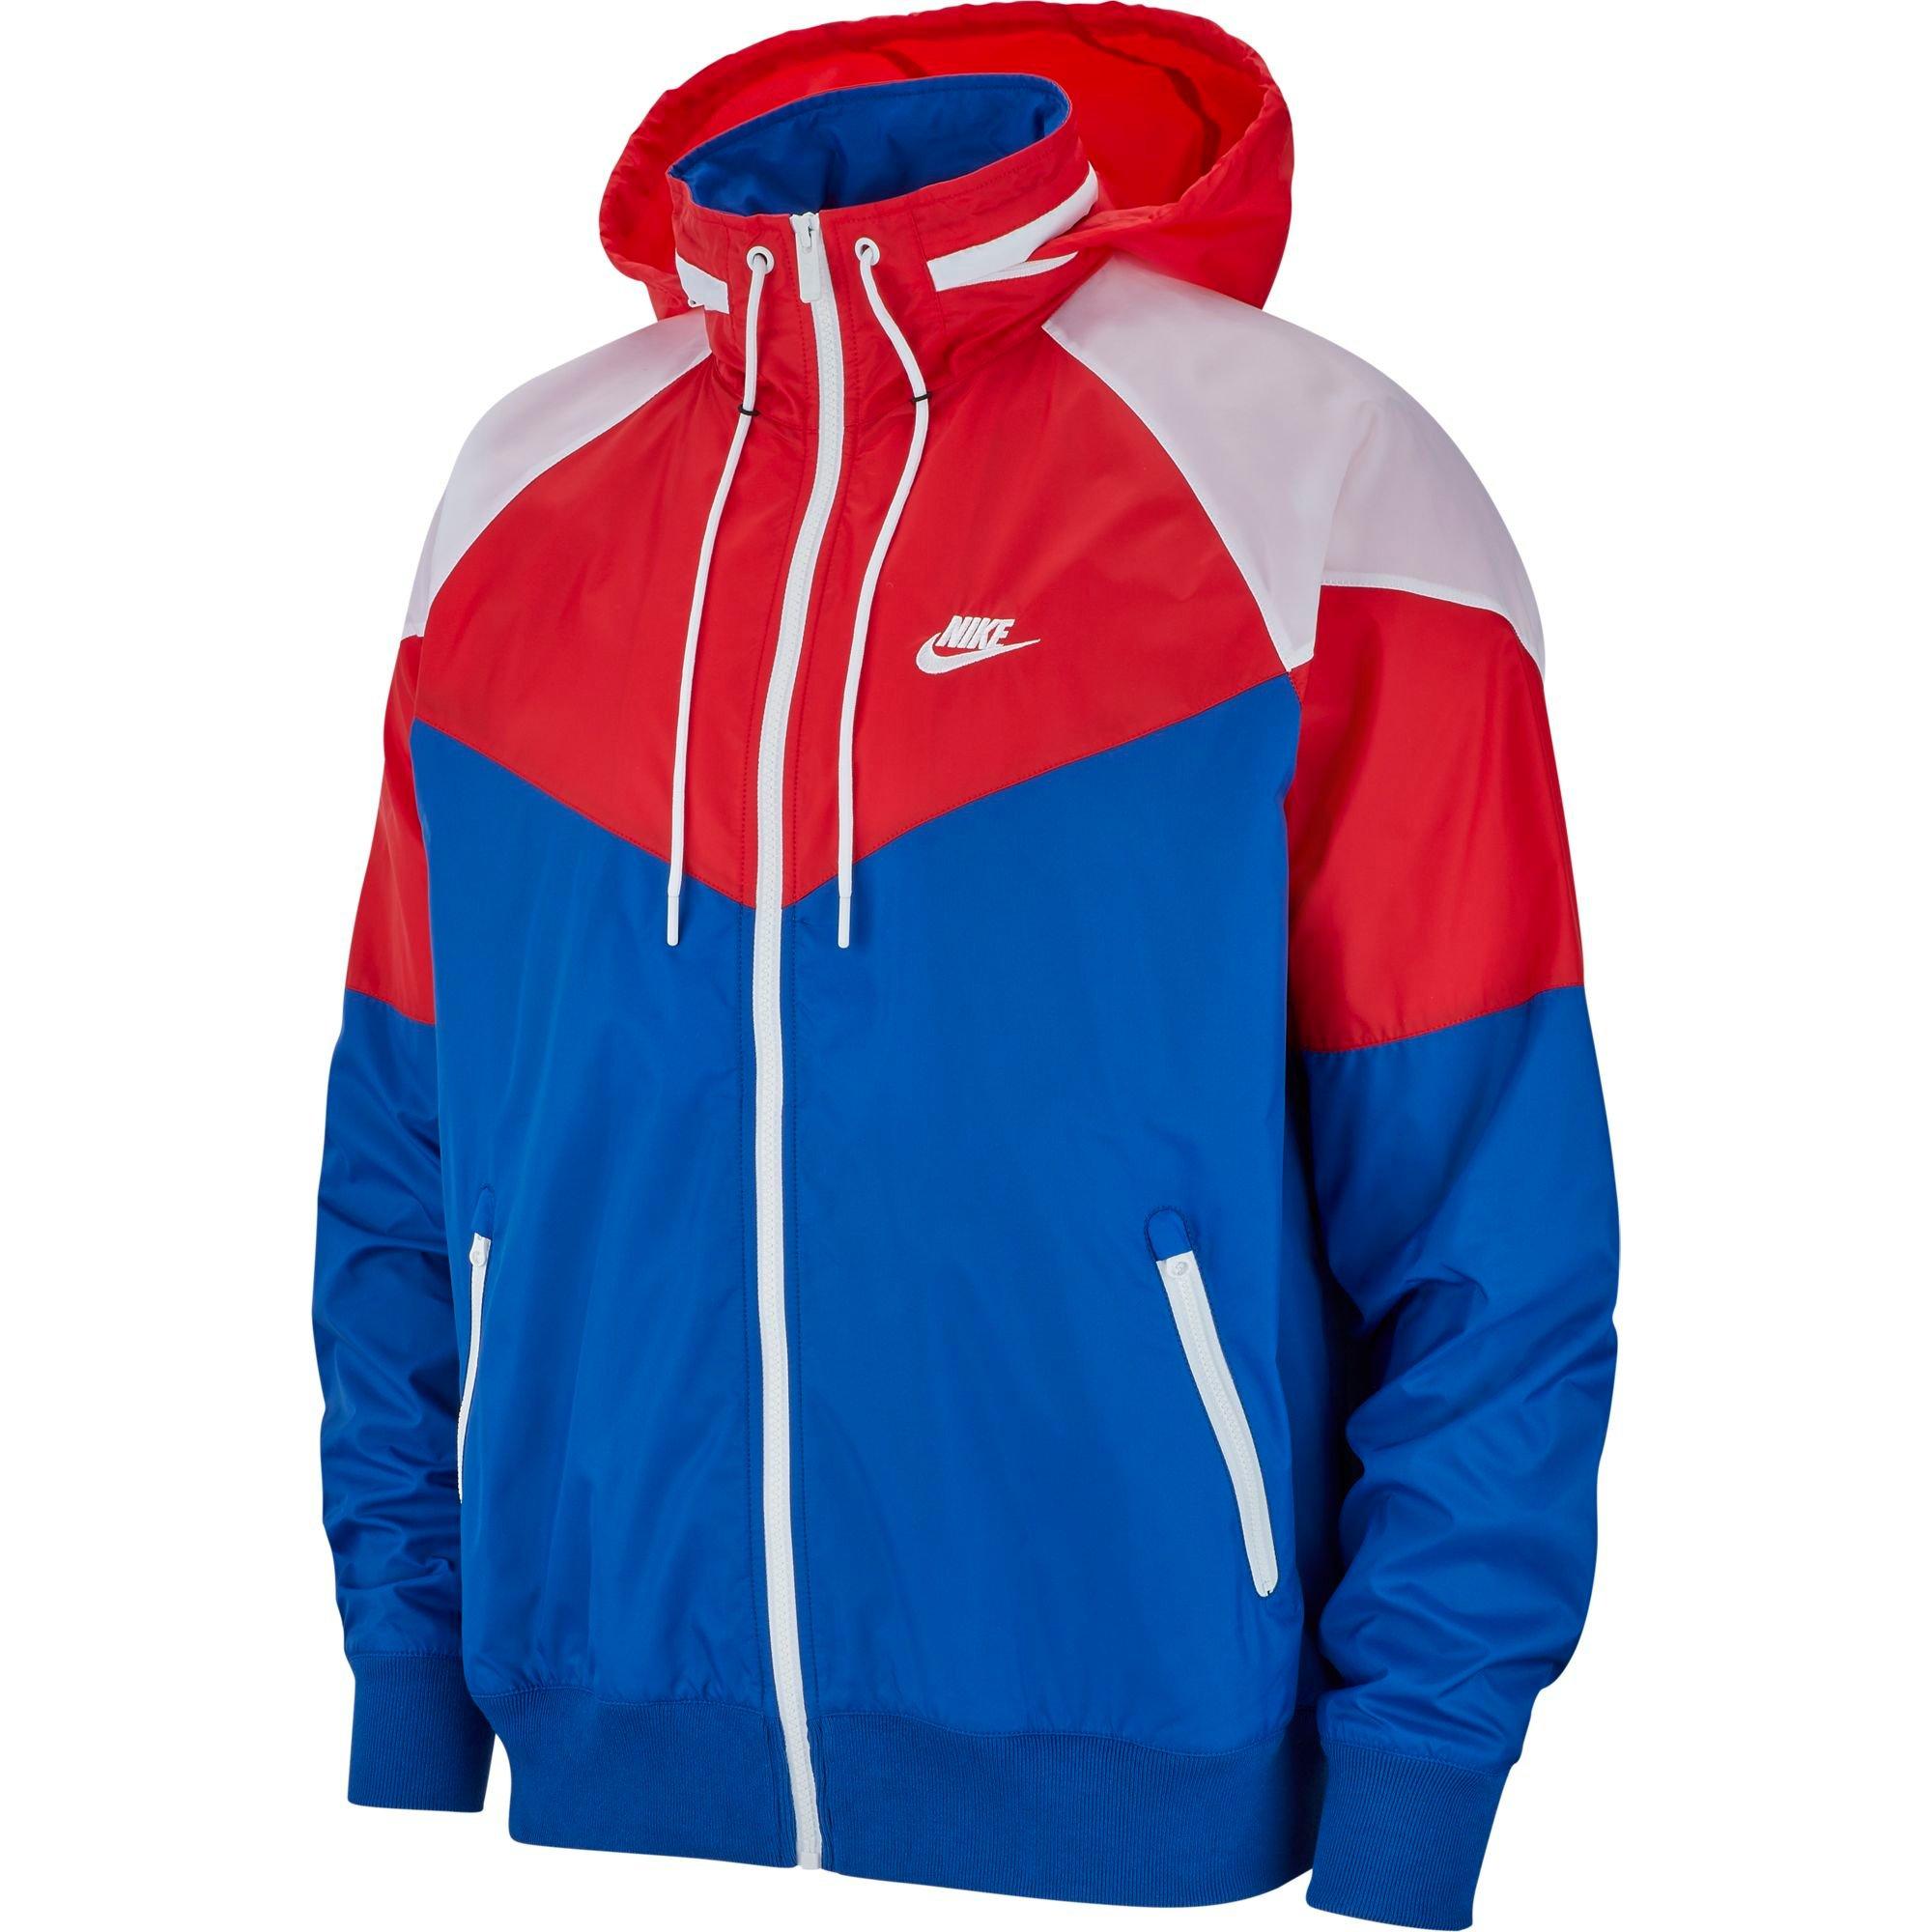 red white and blue nike jacket